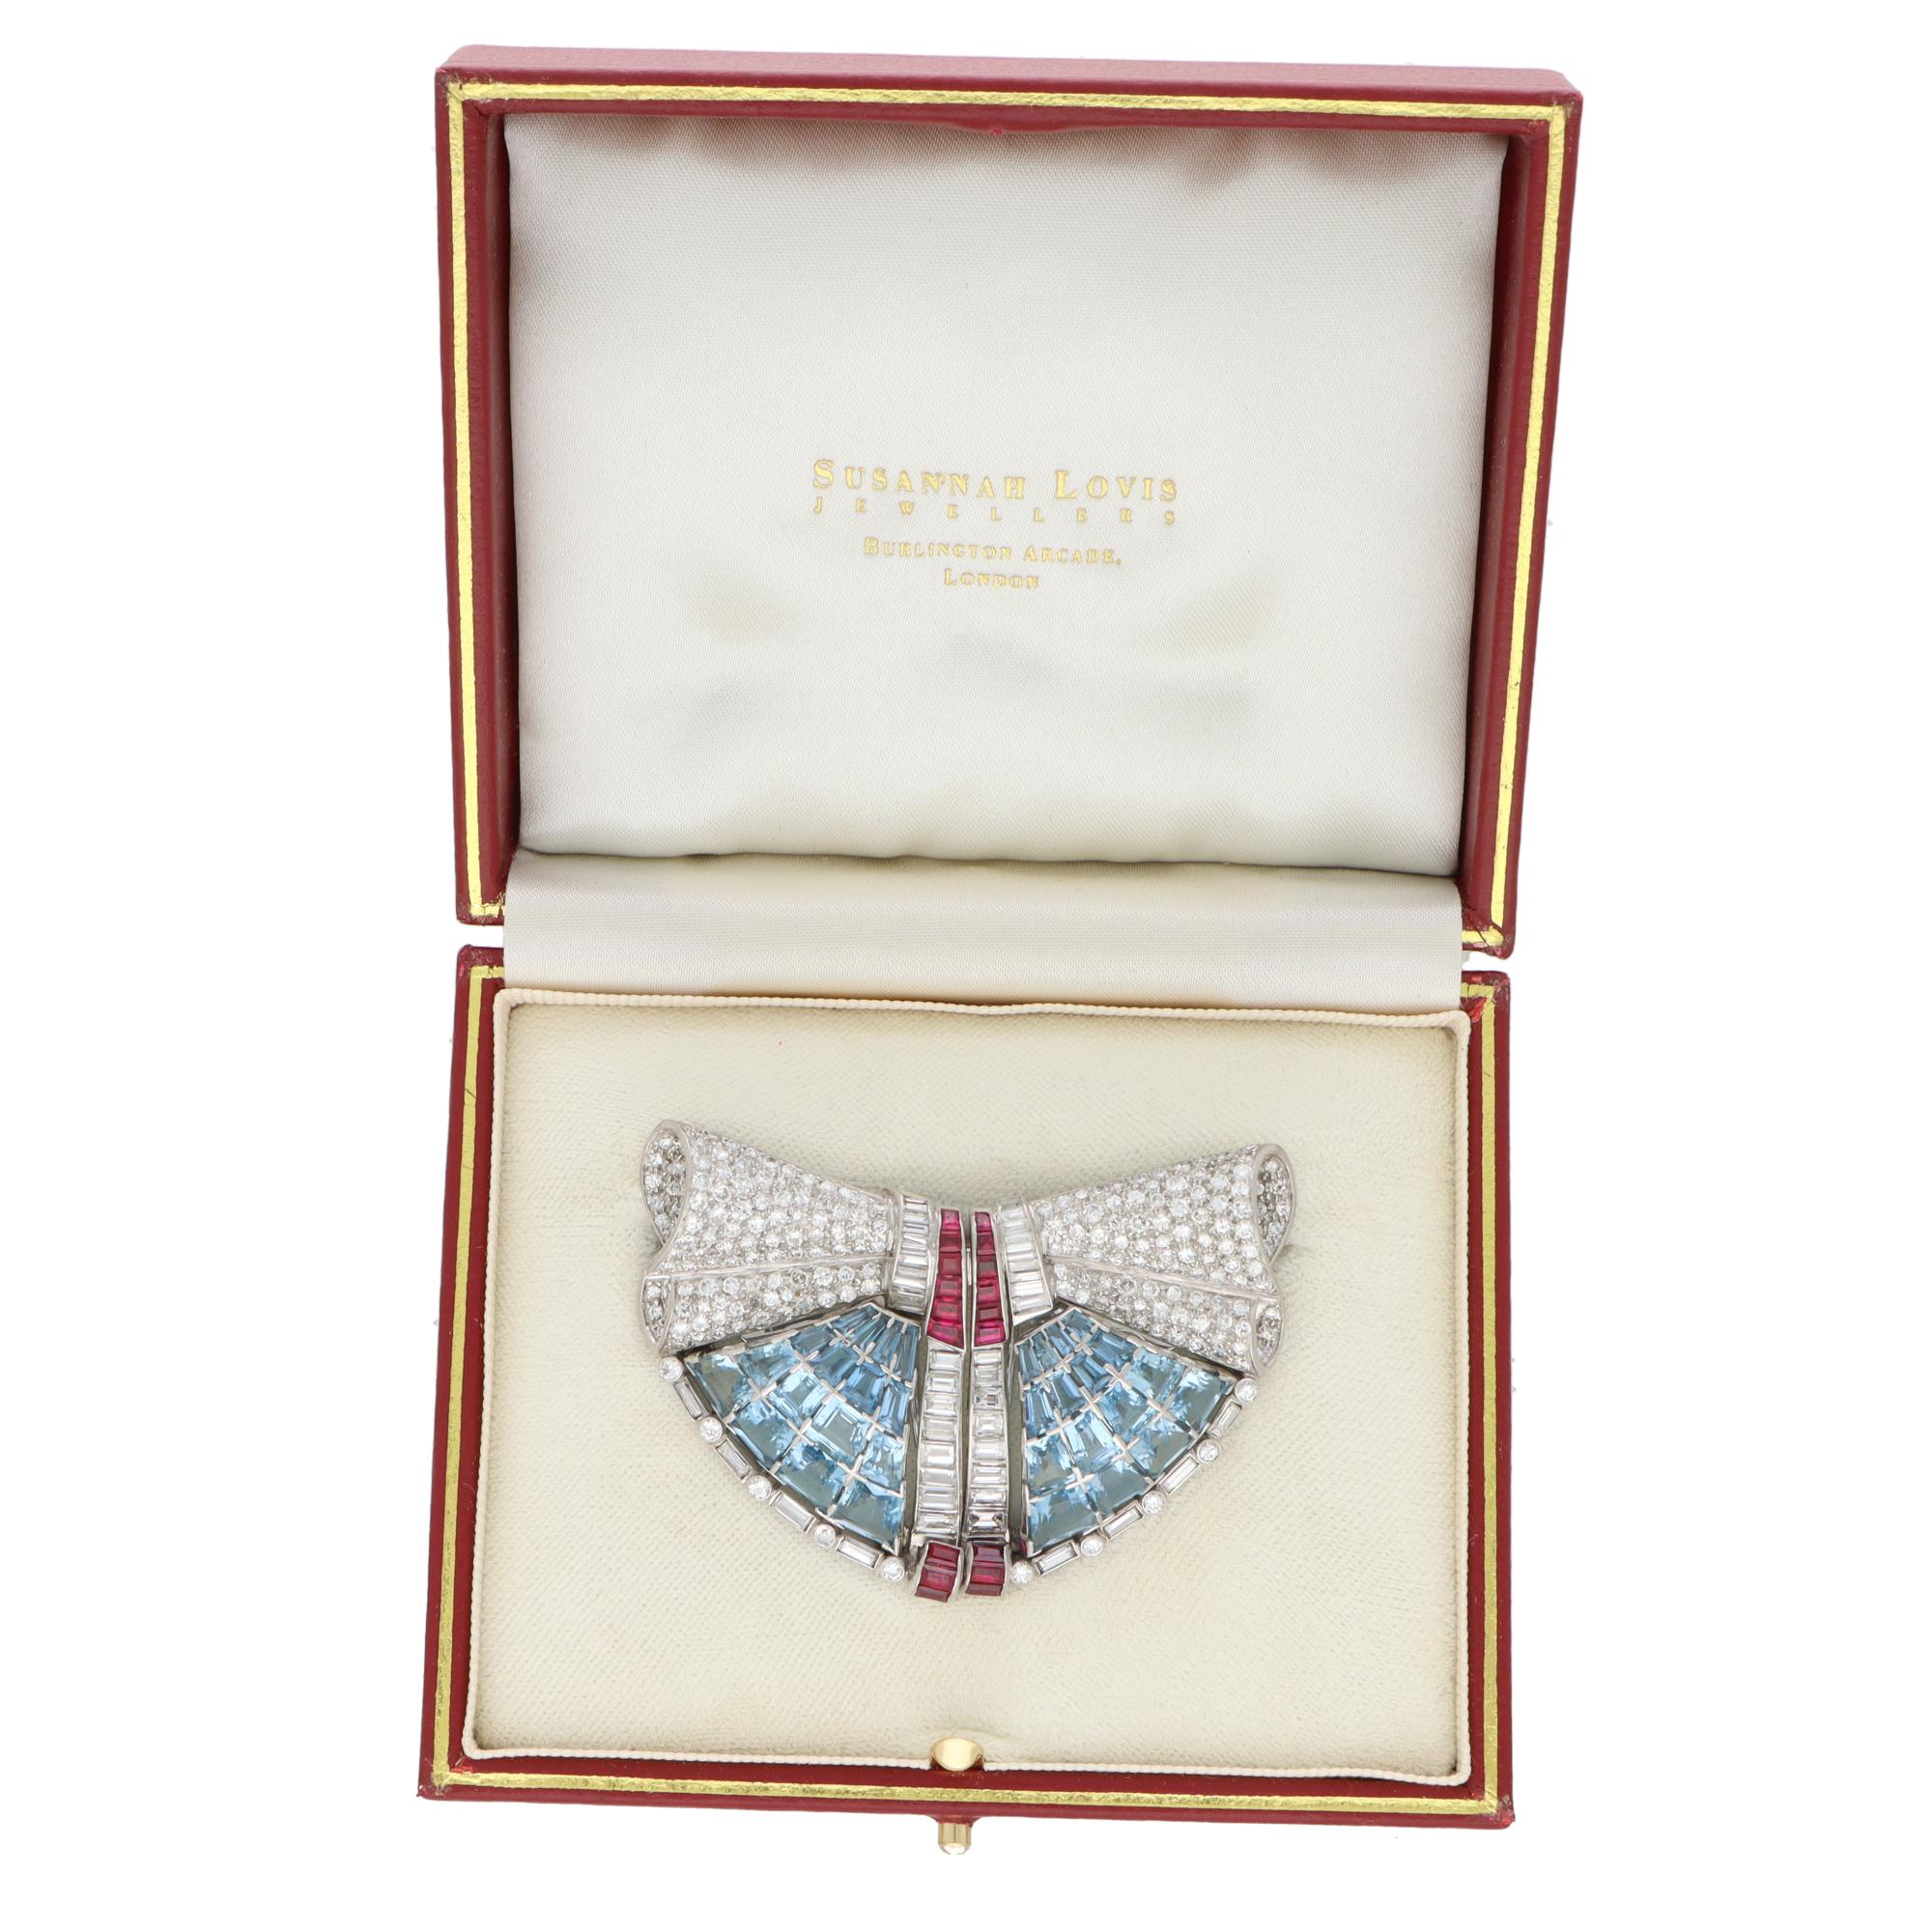  A beautiful Art Deco aquamarine, ruby and diamond double clip convertible brooch set in platinum.

The brooch depicts a bow motif and is set with approximately 310 individual stones. The top of the bow is pave set with transitional and round